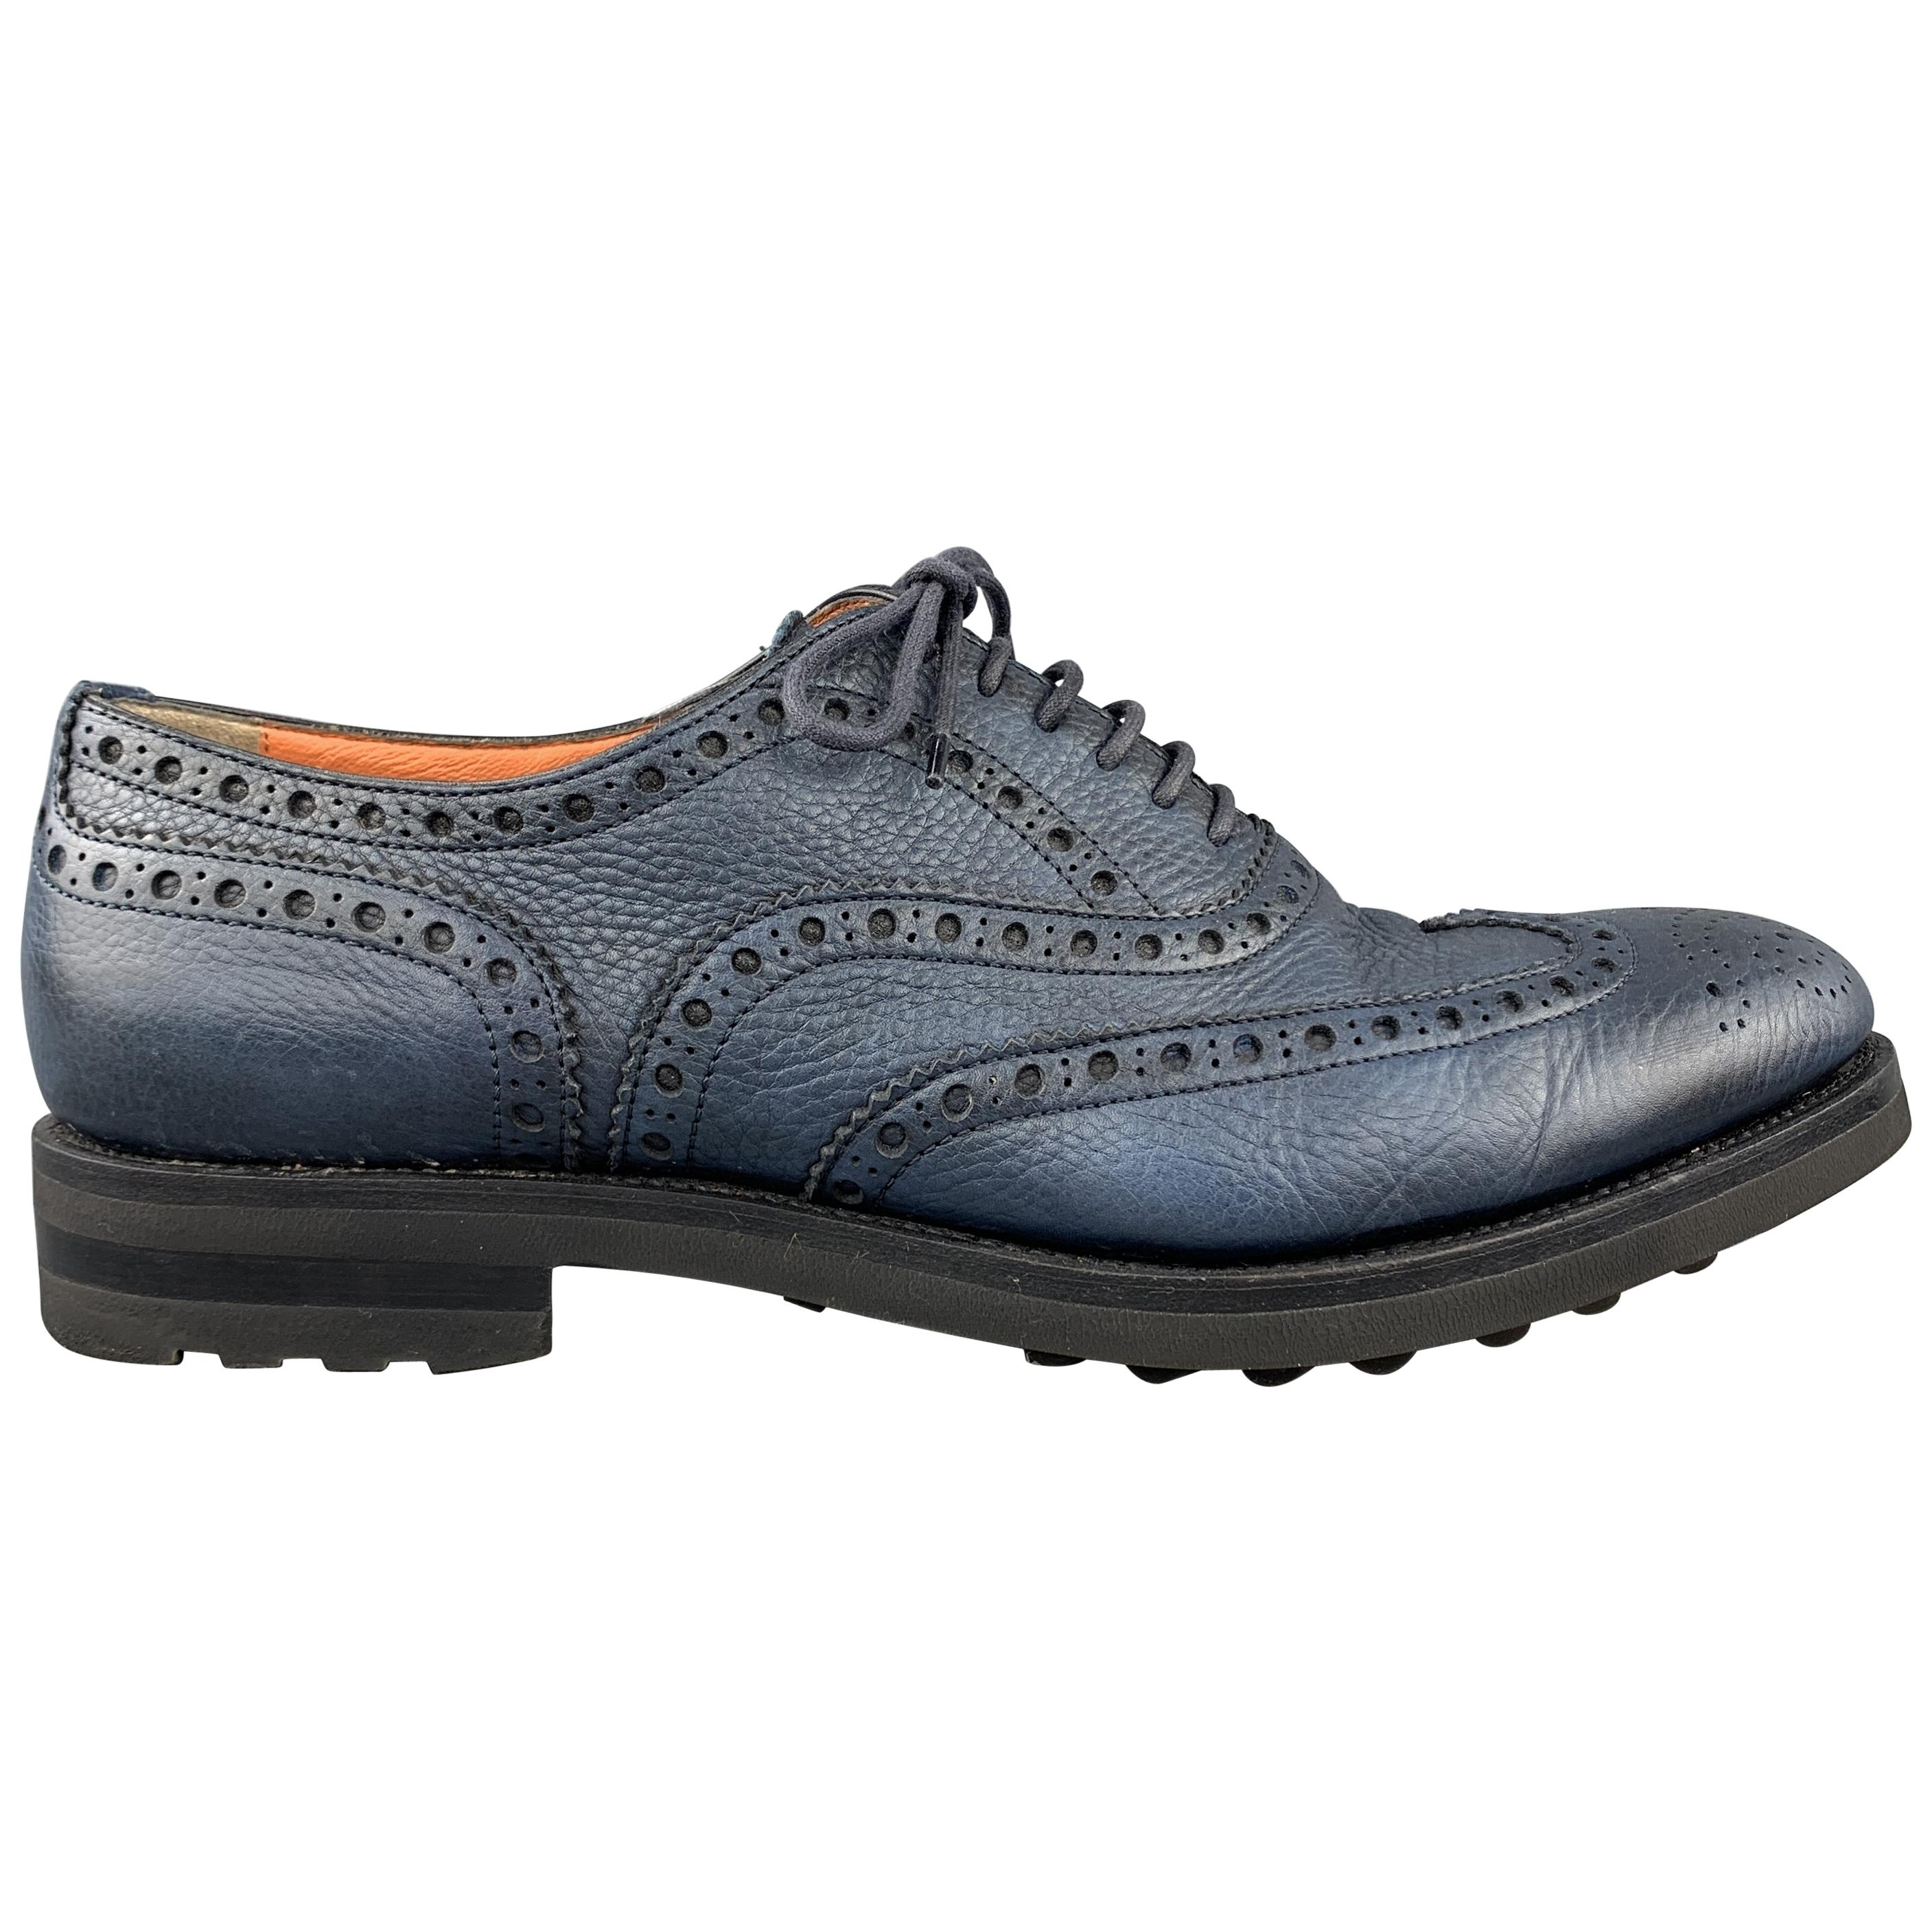 SANTONI Size 10 Navy Leather Wingtip Rubber Sole Lace Up Brogues